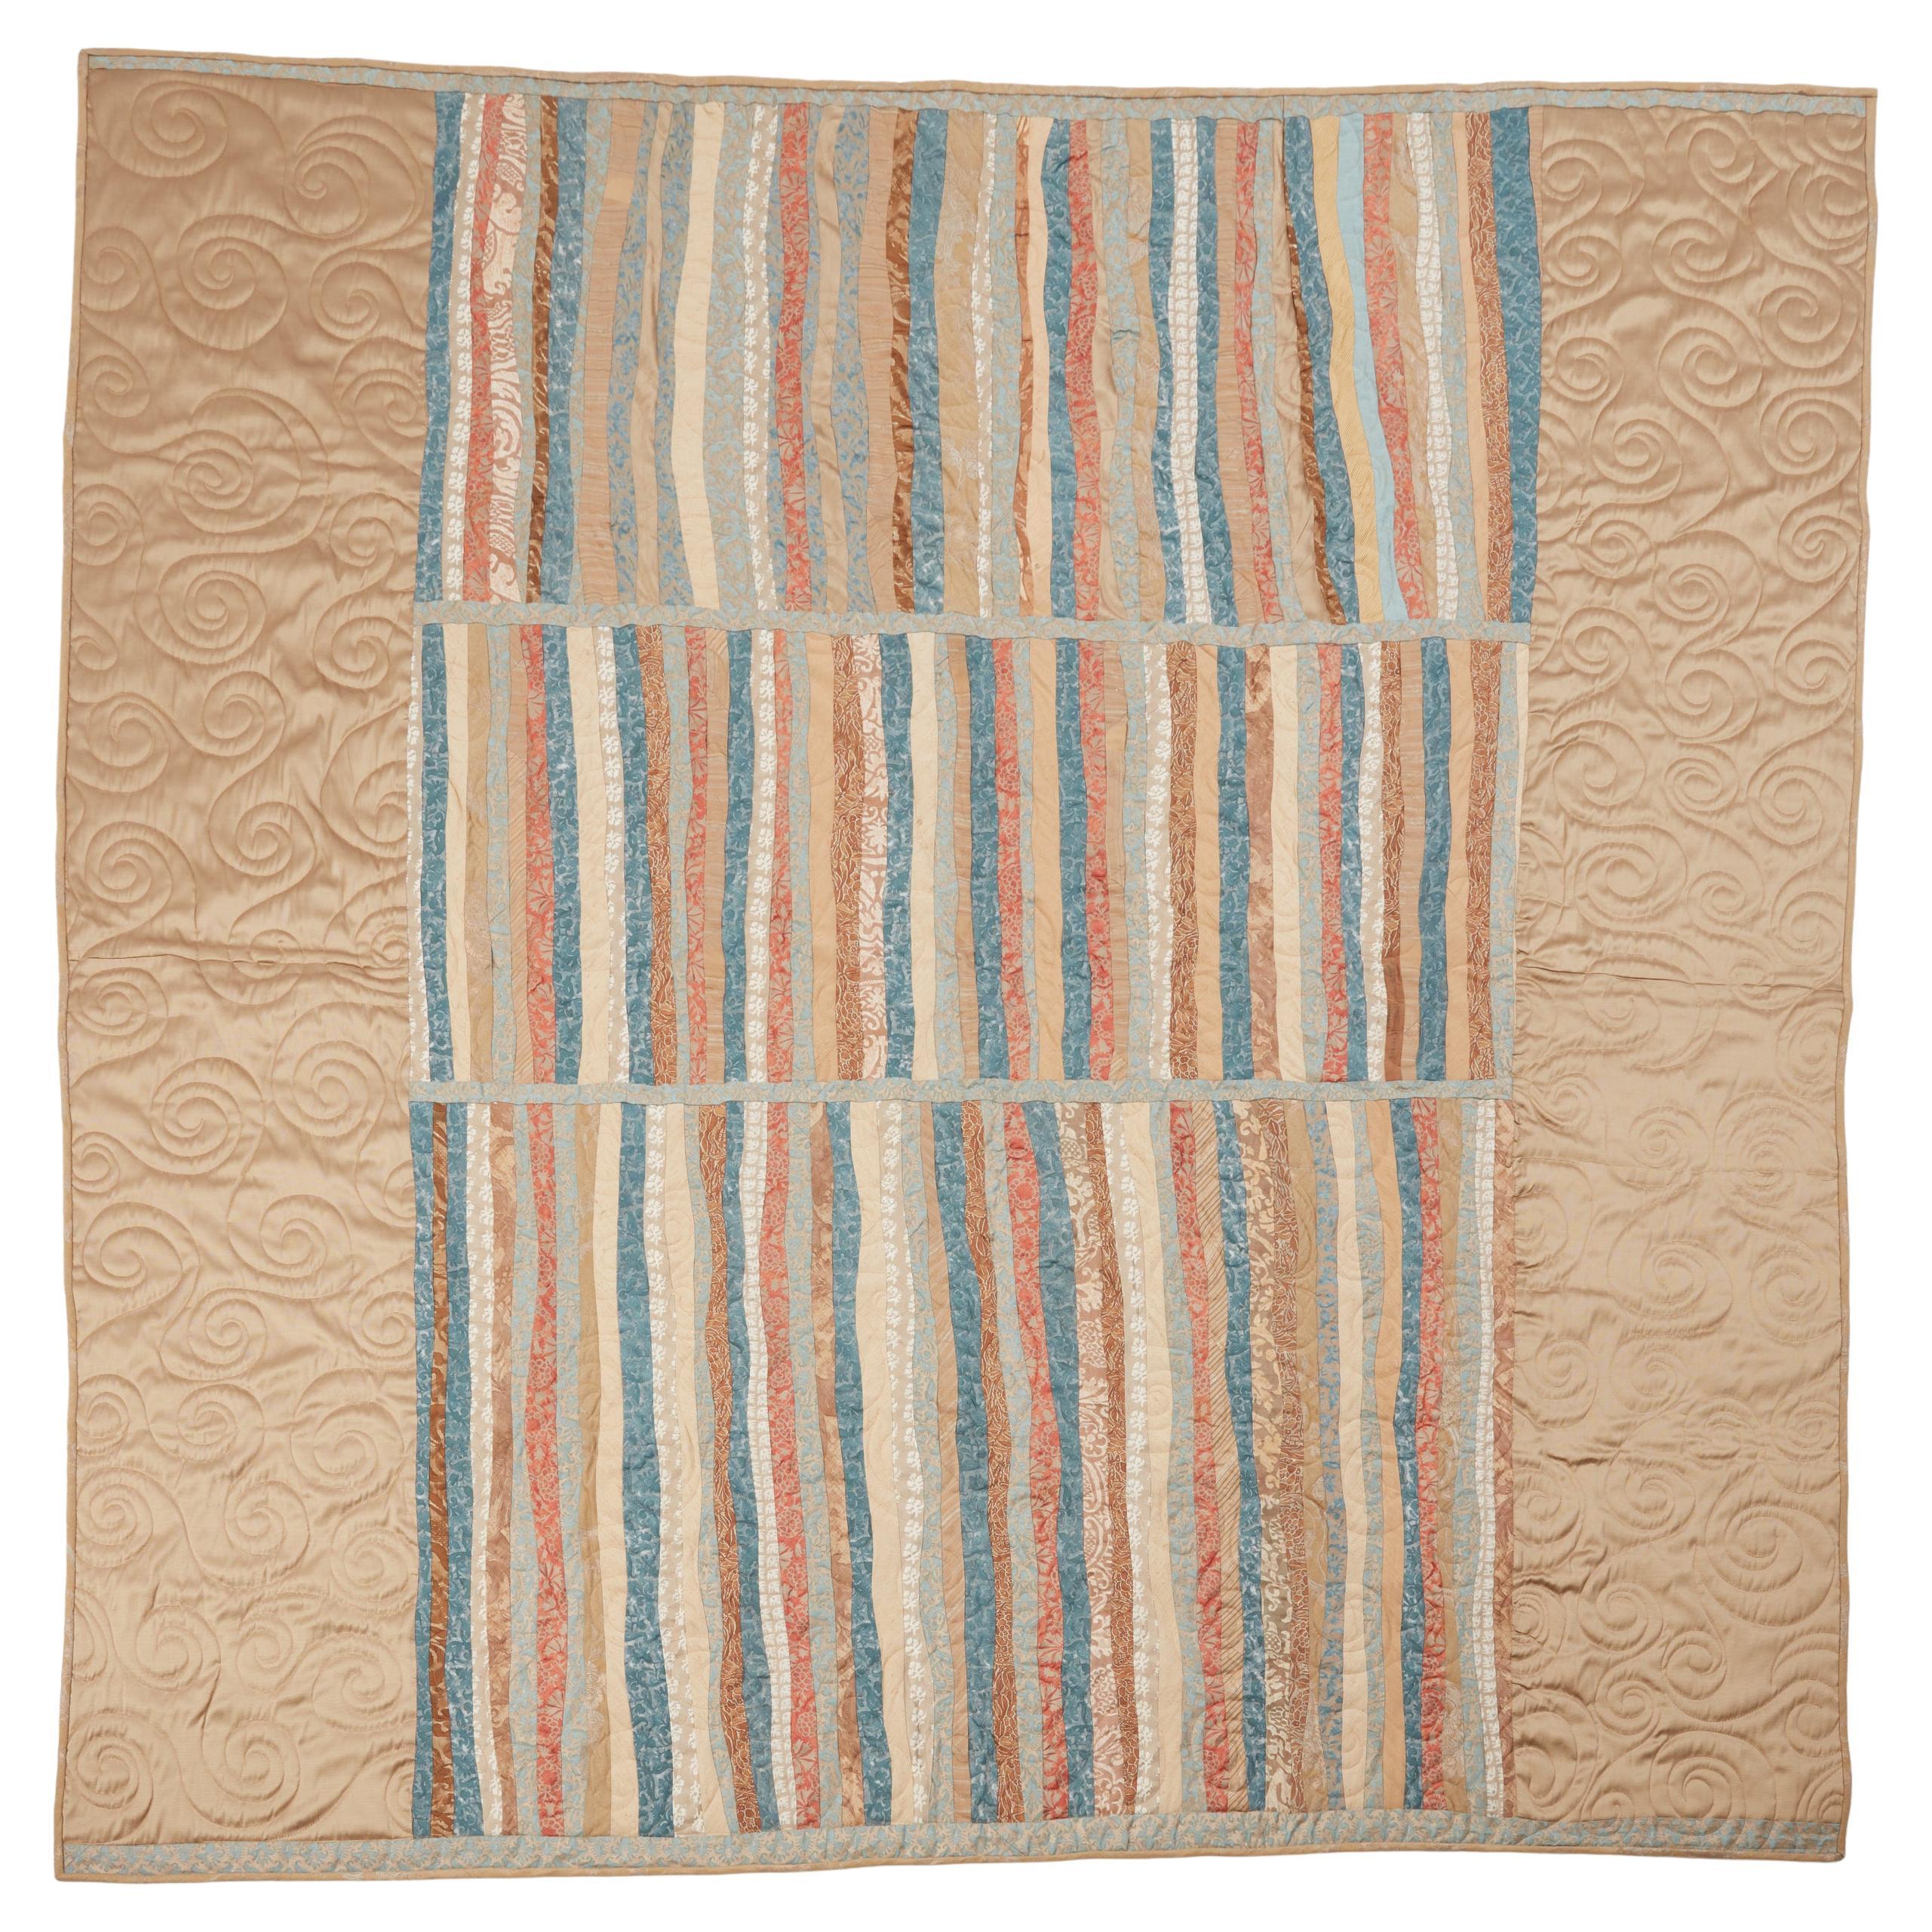 Artisan Made Quilt Made Using Vintage Fortuny Fabric by David Duncan Studio